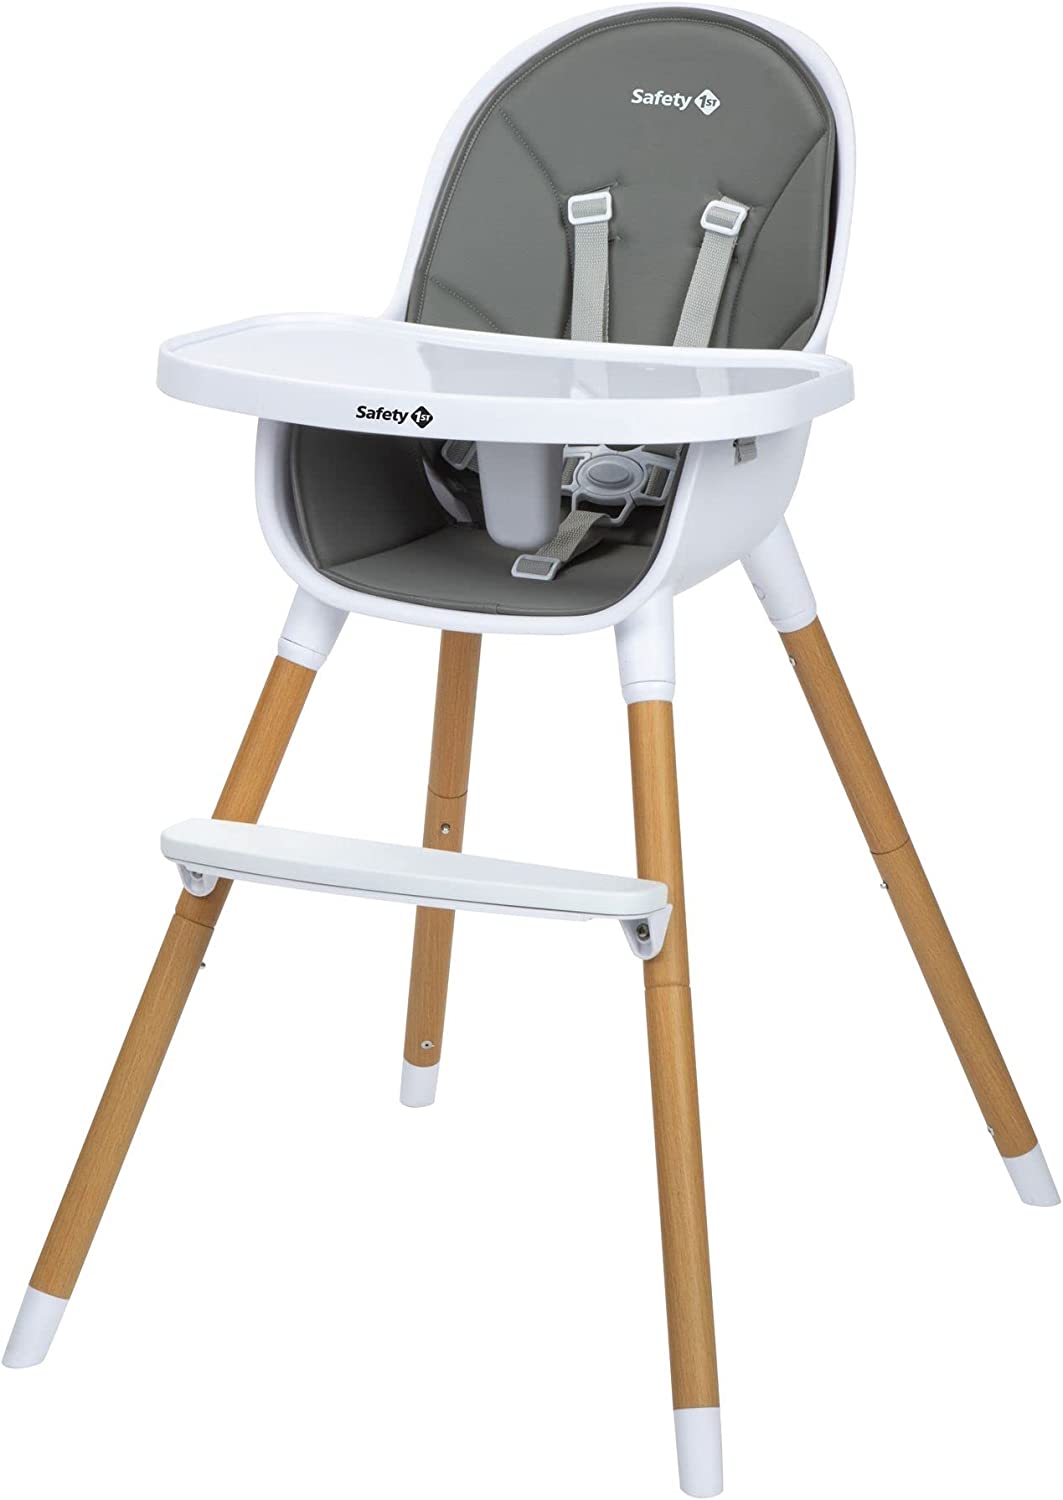 Safety 1st high chair